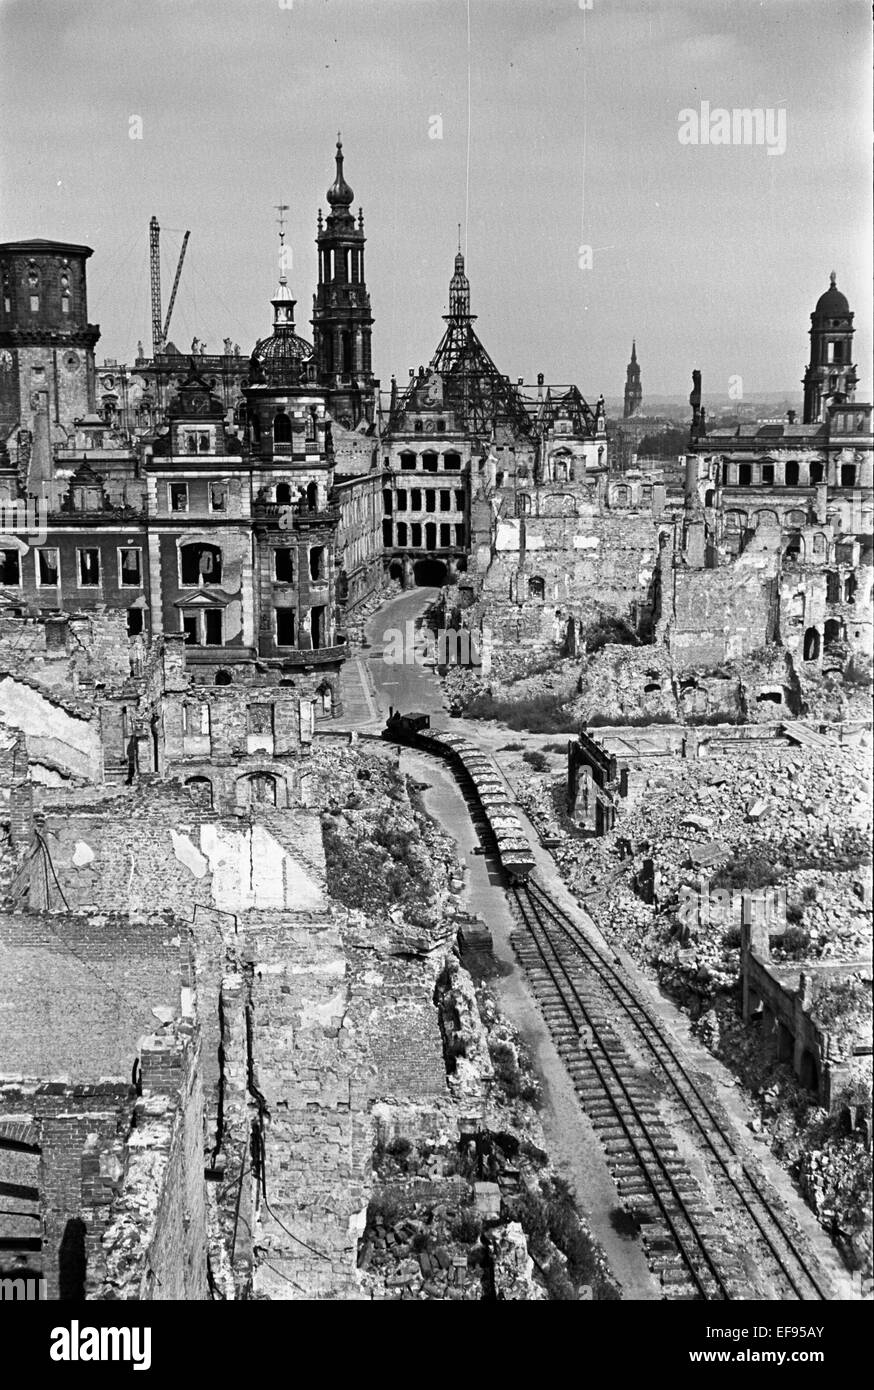 Trümmerbahn (rubble train) in the Schloßstraße in front of the destroyed Dresden Castle with the Hausmannsturm, Katholische Hofkirche (Cathedral of the Holy Trinity) and the Ständehaus (right). Date unknown (1945 - 1950). Photo: Deutsche Fotothek / Richard Peter jun. - NO WIRE SERVICE – Stock Photo